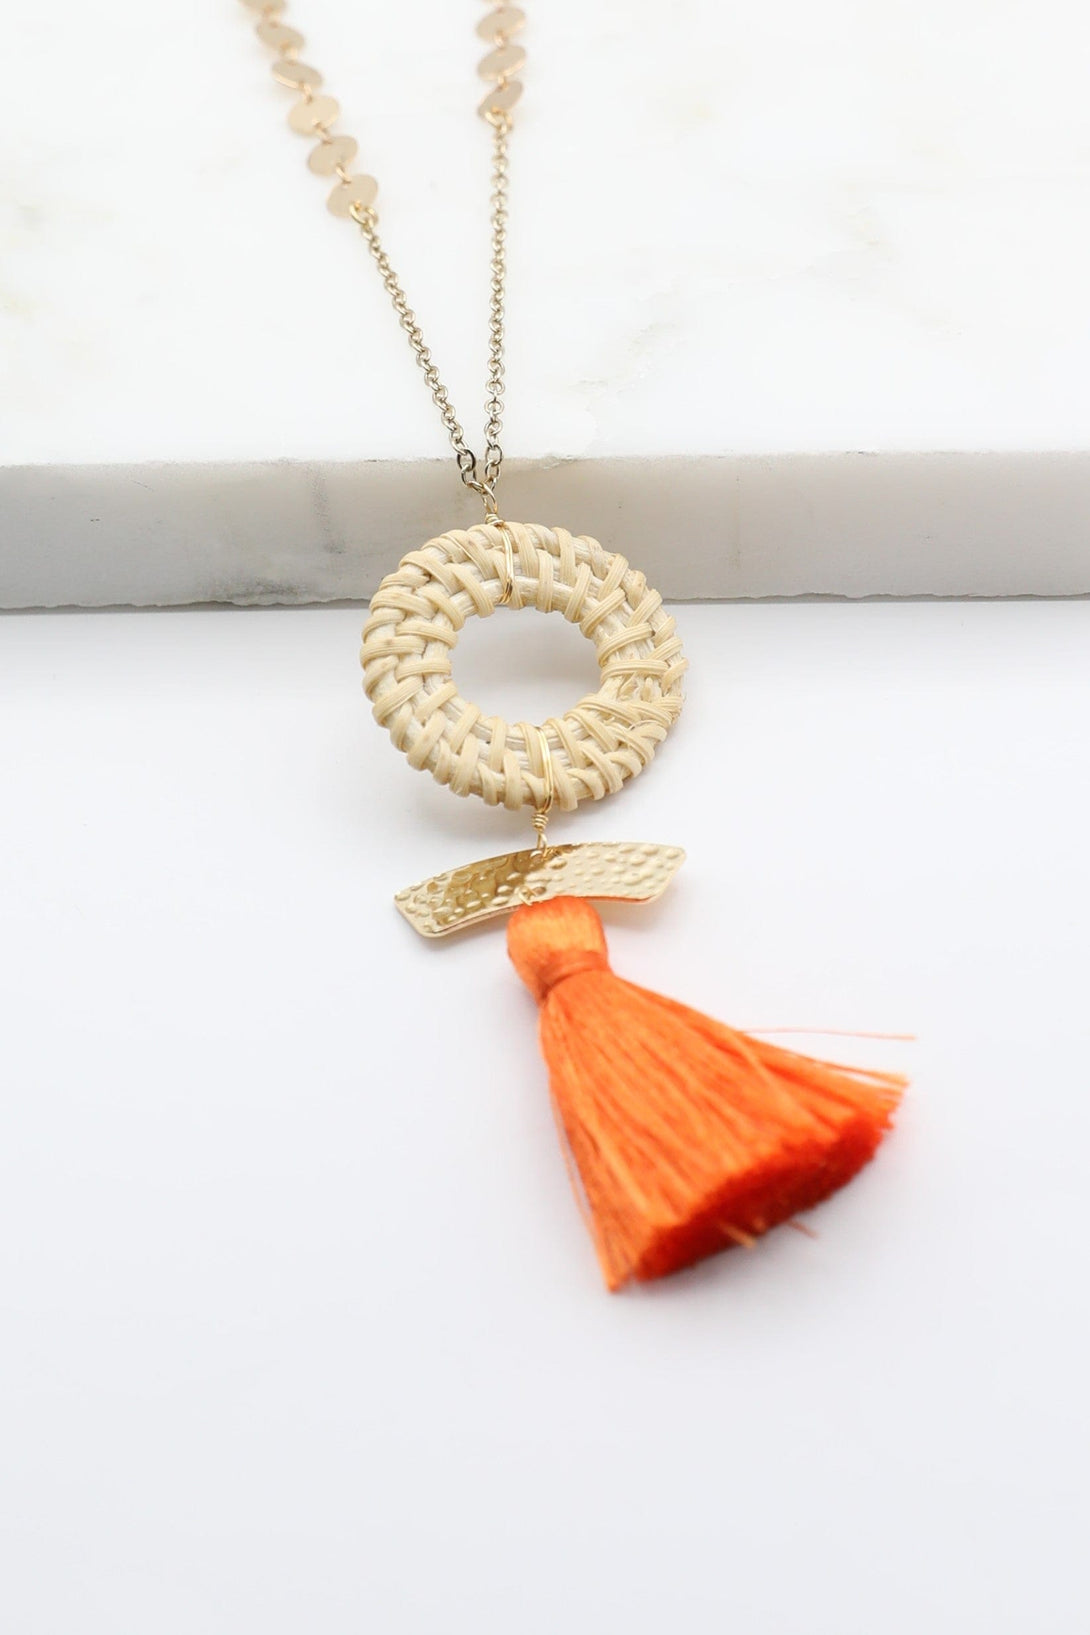 Long Disk Chain Necklace with Woven Circle, Gold Bar and Tassel